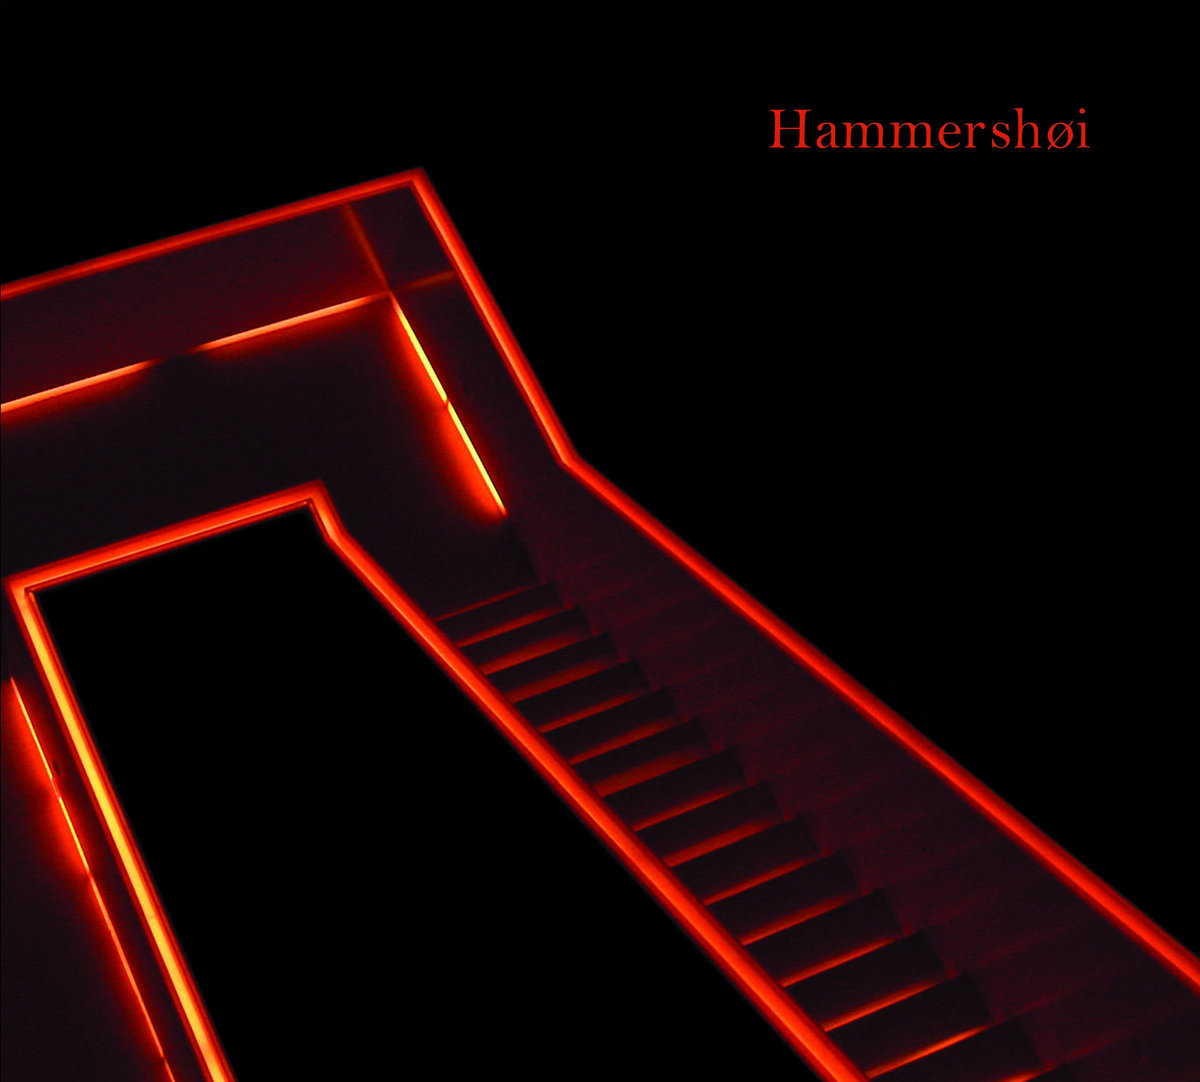 Hammershoi cover